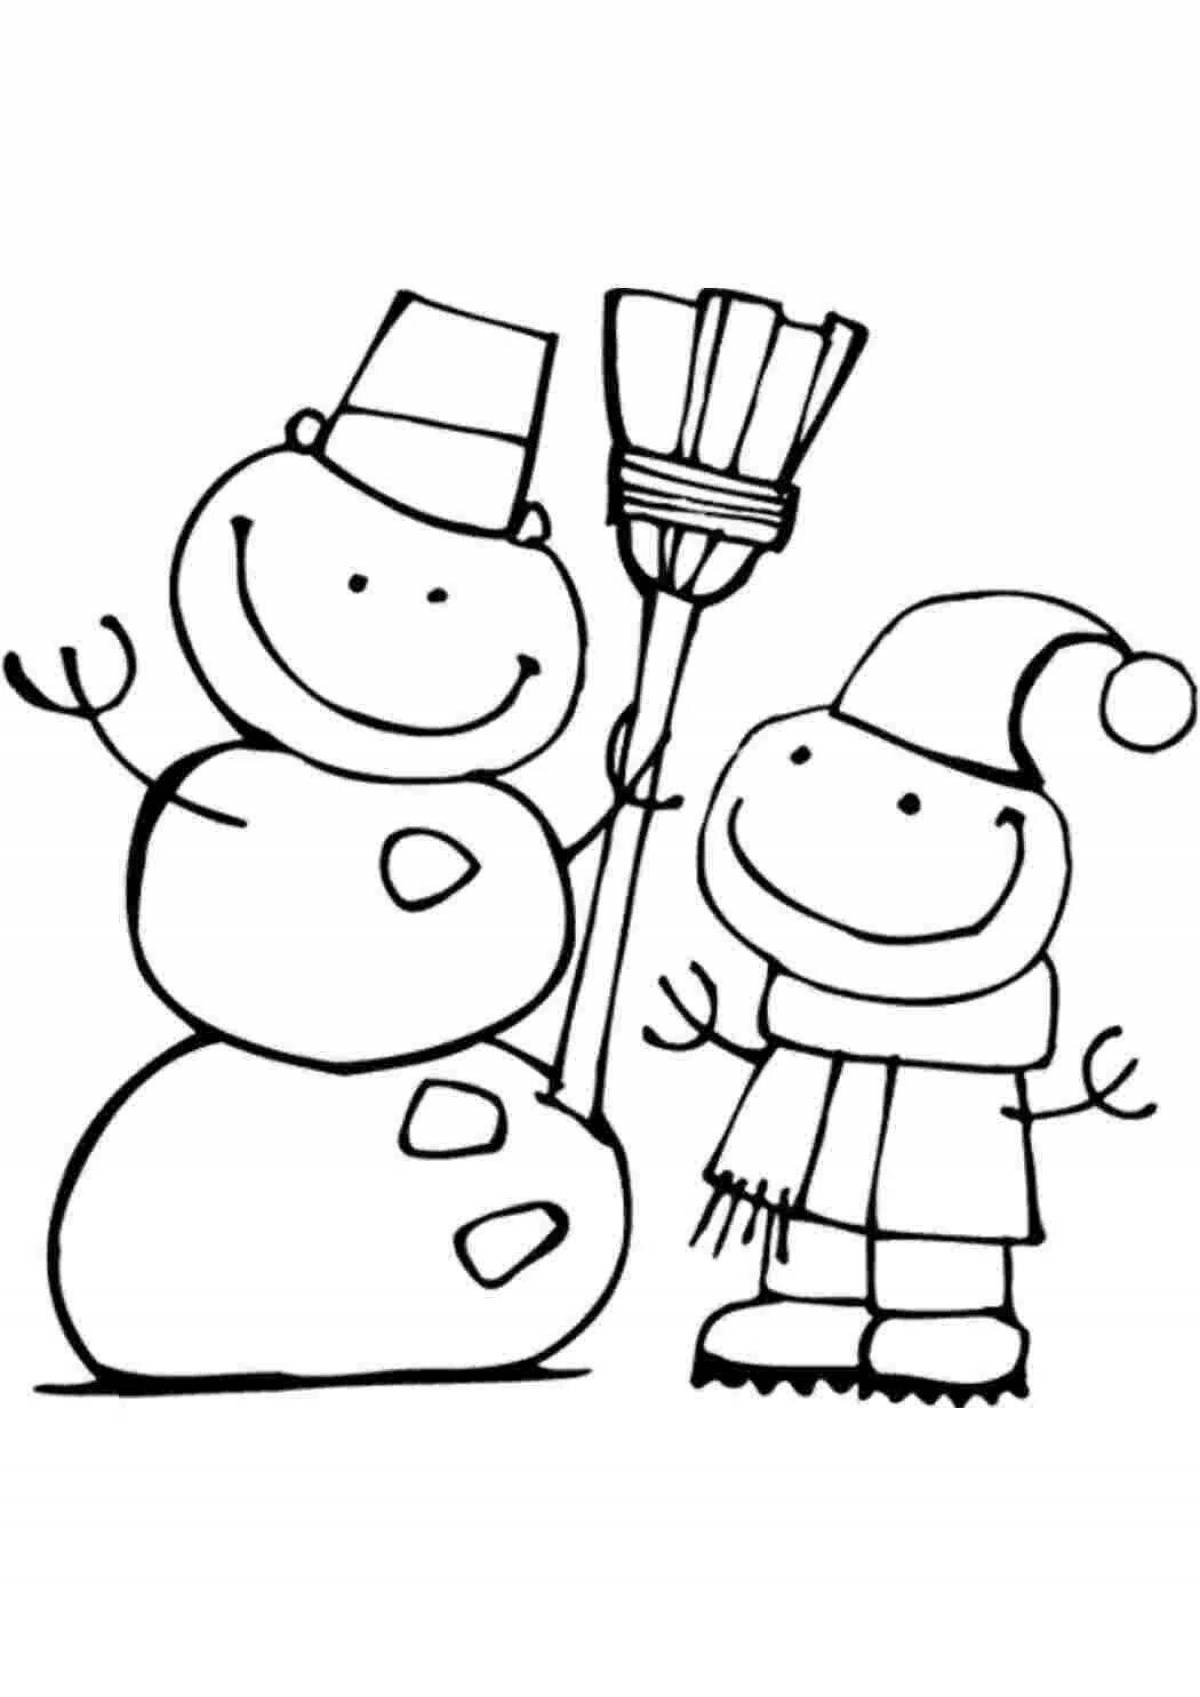 Adorable Snowman Day Coloring Page